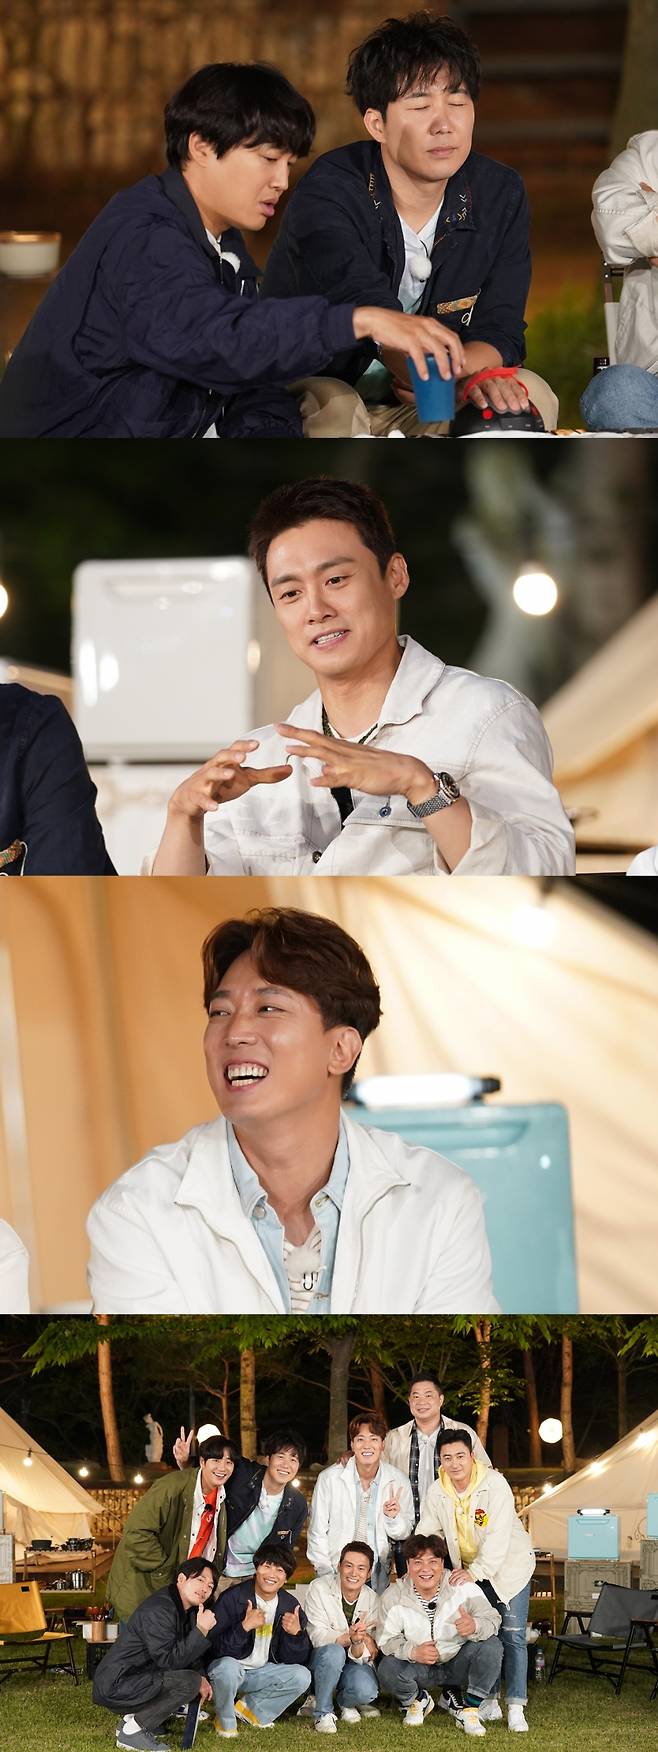 In the 11th MBN entertainment program National Cook Cook (directed by Kim Sung, hereinafter referred to as Bang Cook), which will be broadcast on the afternoon of the 19th, Do Kyoung-wan, Oh Sang-jin and Kim Hwan will appear as camping friends to conduct a truth talk with a penal punishment for water slapping.On this day, Do Kyoung-wan, Oh Sang-jin and Kim Hwan will play an irresistible Disclosure against each other.Here, even a lie detector appears, leading to an exciting development.Actor Tim Cha Tae-hyun proposes to perform a penalty for the patented water of Bangbang Cook to a person who has inconsistent with a lie detector for performing an entertainment express training for three former announcers.In particular, Do Kyoung-wan is embarrassed by Kim Hwans Disclosure and can not easily speak.Kim Hwan said that Do Kyoung-wan was drunk and said, My wife Jang Yun-jeong was married to me and it was good. Disclosure, everyone joins together to grasp the authenticity.Indeed, the expectation of all the people who are genuine that Do Kyoung-wans confession of drunkenness is really in their hearts is concentrated.In addition, Oh Sang-jin boasts a sweet side toward his wife Kim So-young and receives jealousy around him.Dad Oh Sang-jin, who has a 20-month-old daughter, reveals his regrets about the honeymoon atmosphere disappearing as the child grows up.He avoids the thrill of a lie detector and stimulates curiosity about whether he can keep the title of love man.In addition, Kim Hwan explains that his wife, who had been a flight attendant in the past, played sad ballad music when she went to the airport and played dance songs when she came home.Kim Hwans tearful efforts to make the situation beautifully knot can be confirmed through broadcasting.